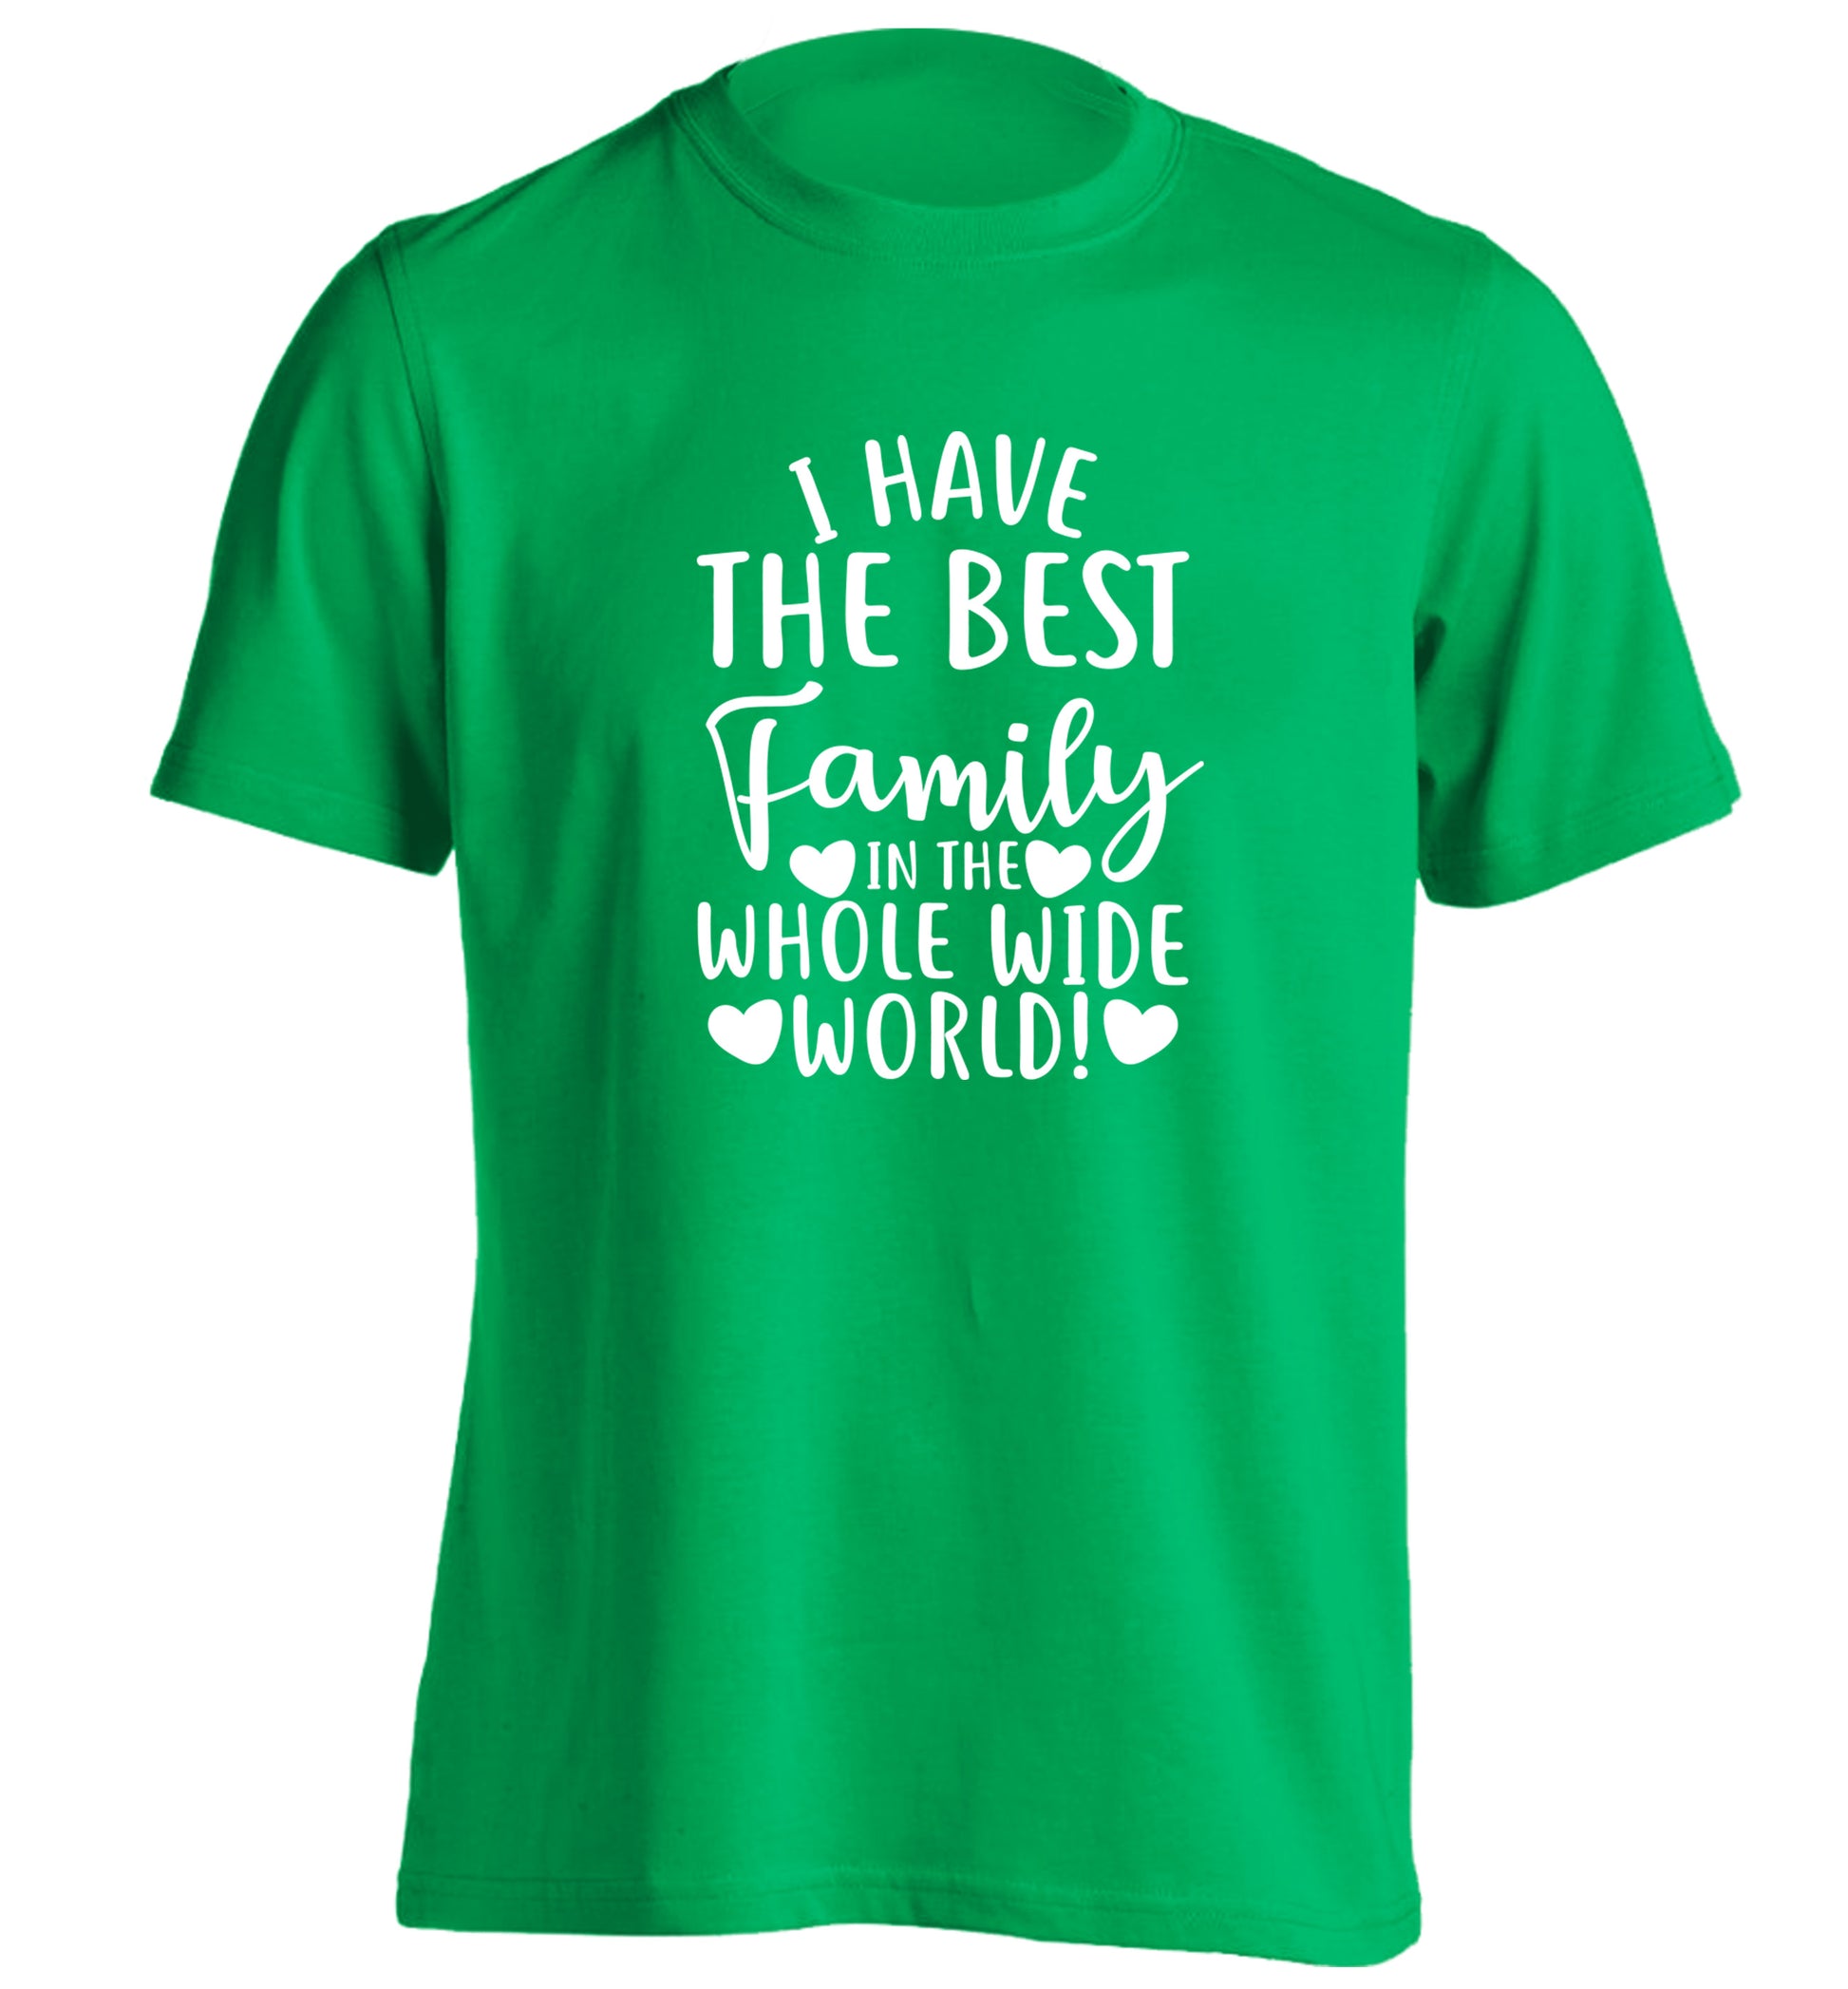 I have the best family in the whole wide world! adults unisex green Tshirt 2XL